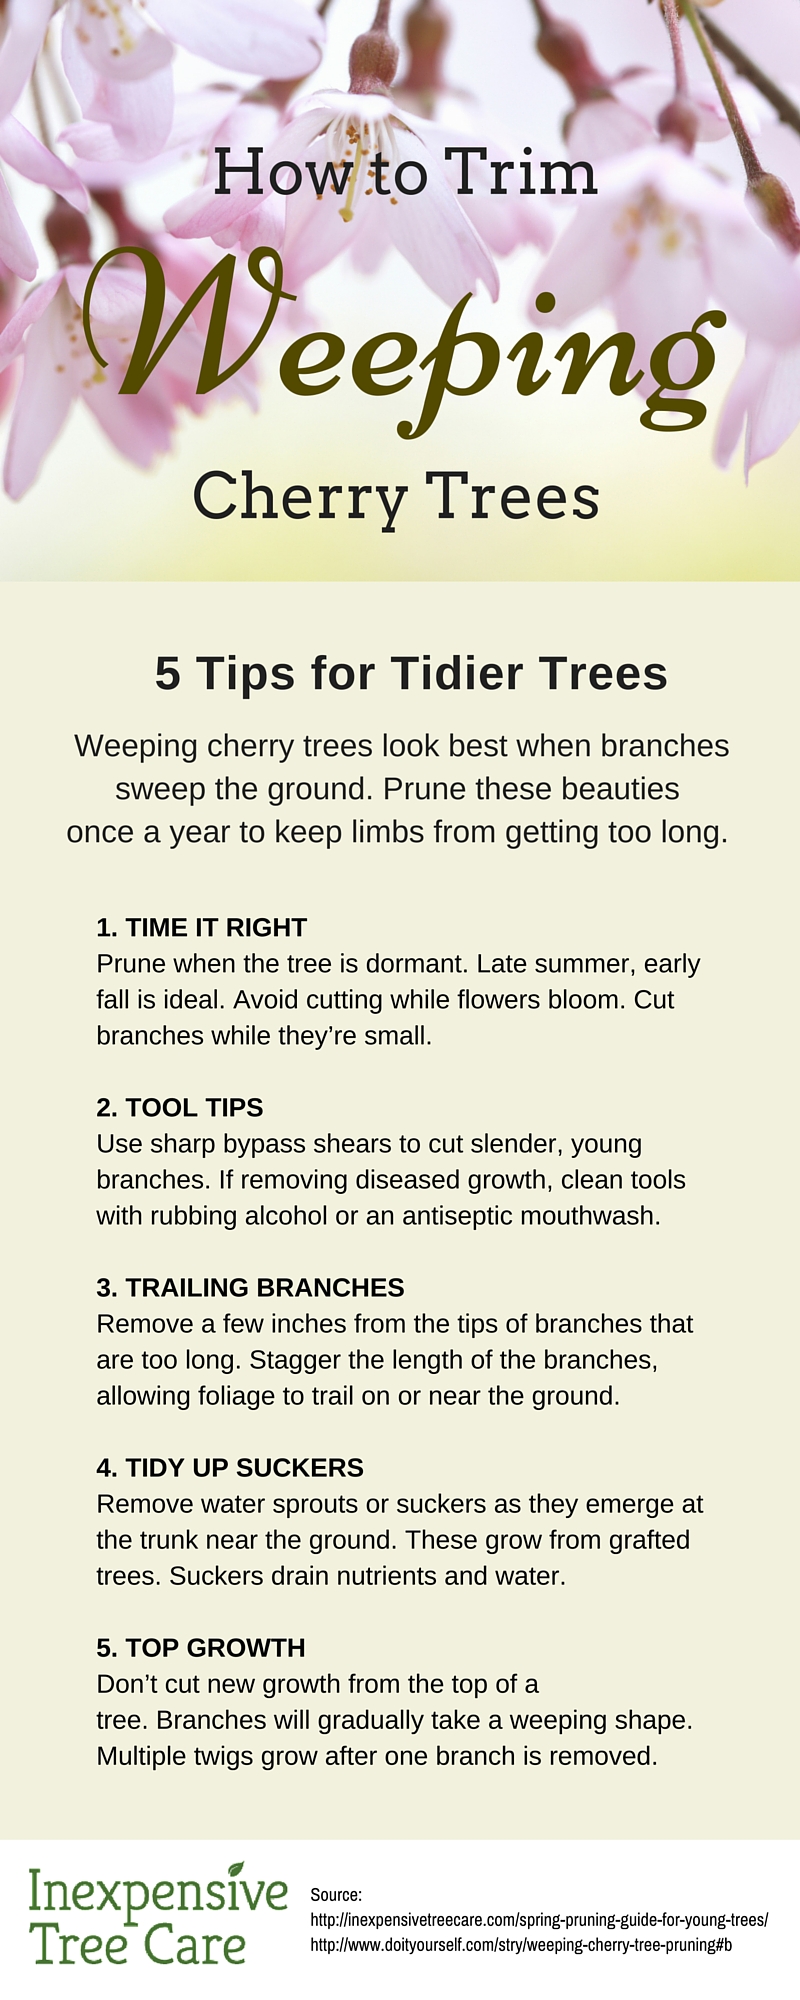 How to Trim a Weeping Cherry Tree